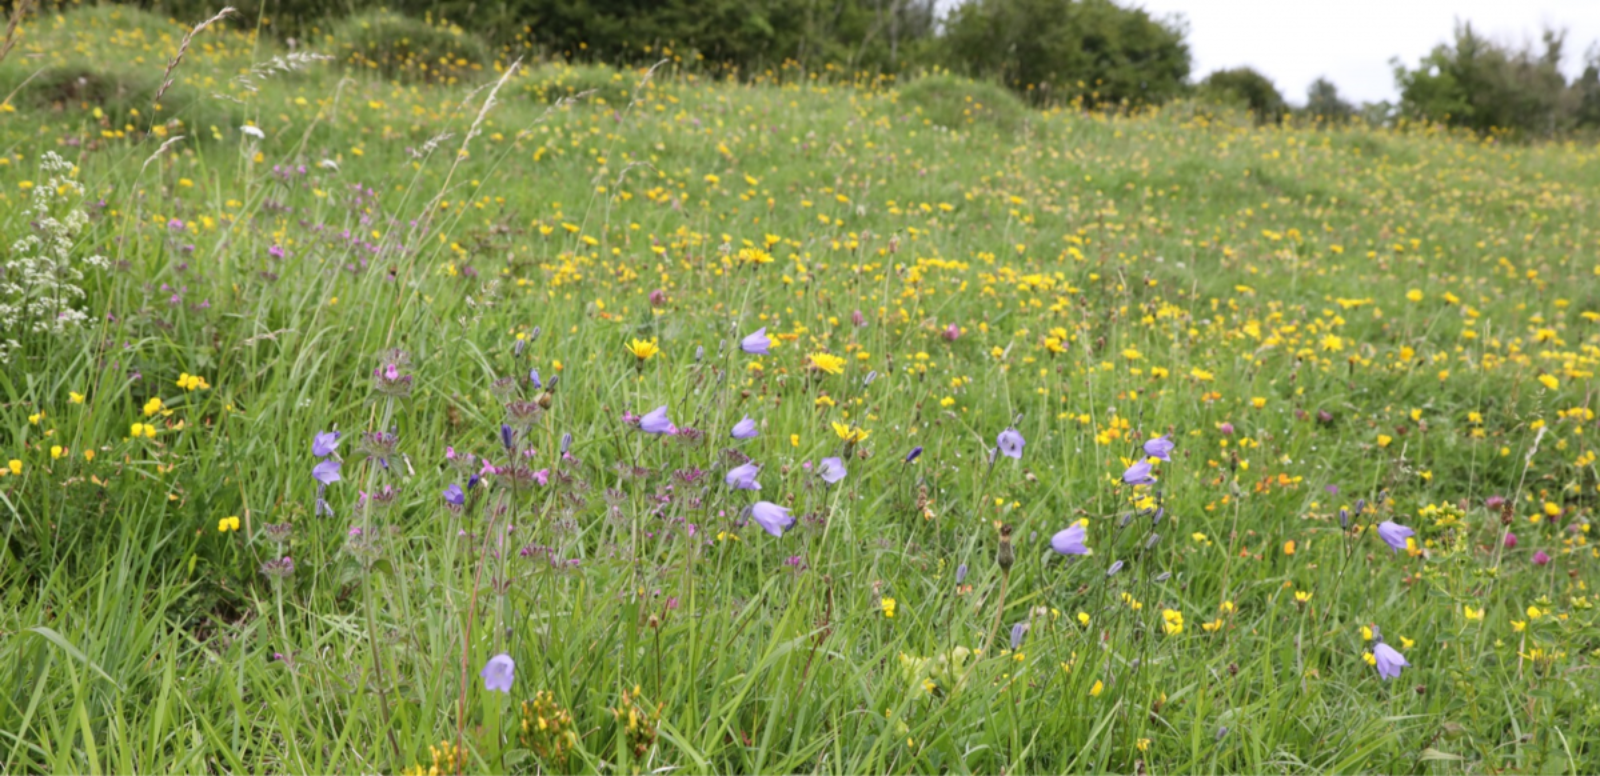 Wildflowers at Daneway Banks nature reserve in July 2020 Credit Jeremy Thomas